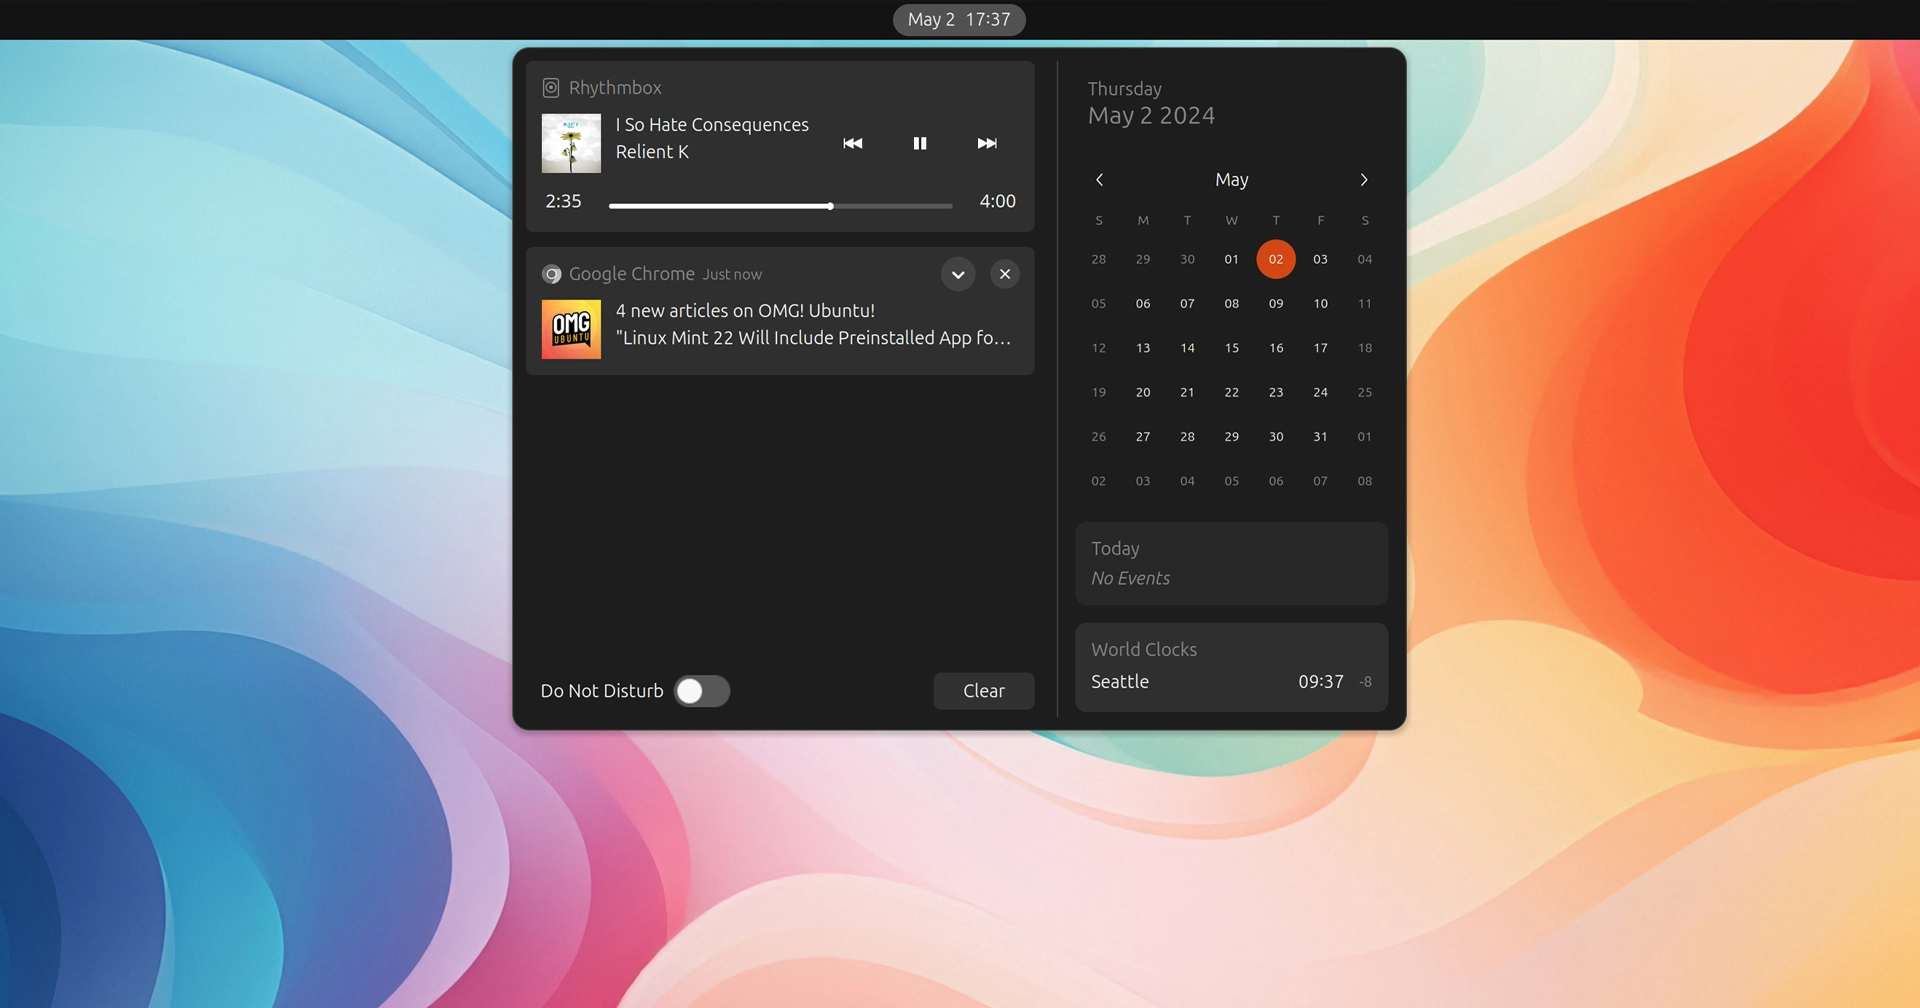 Introducing the Extension That Incorporates a Progress Bar into GNOME Shell Media Controls